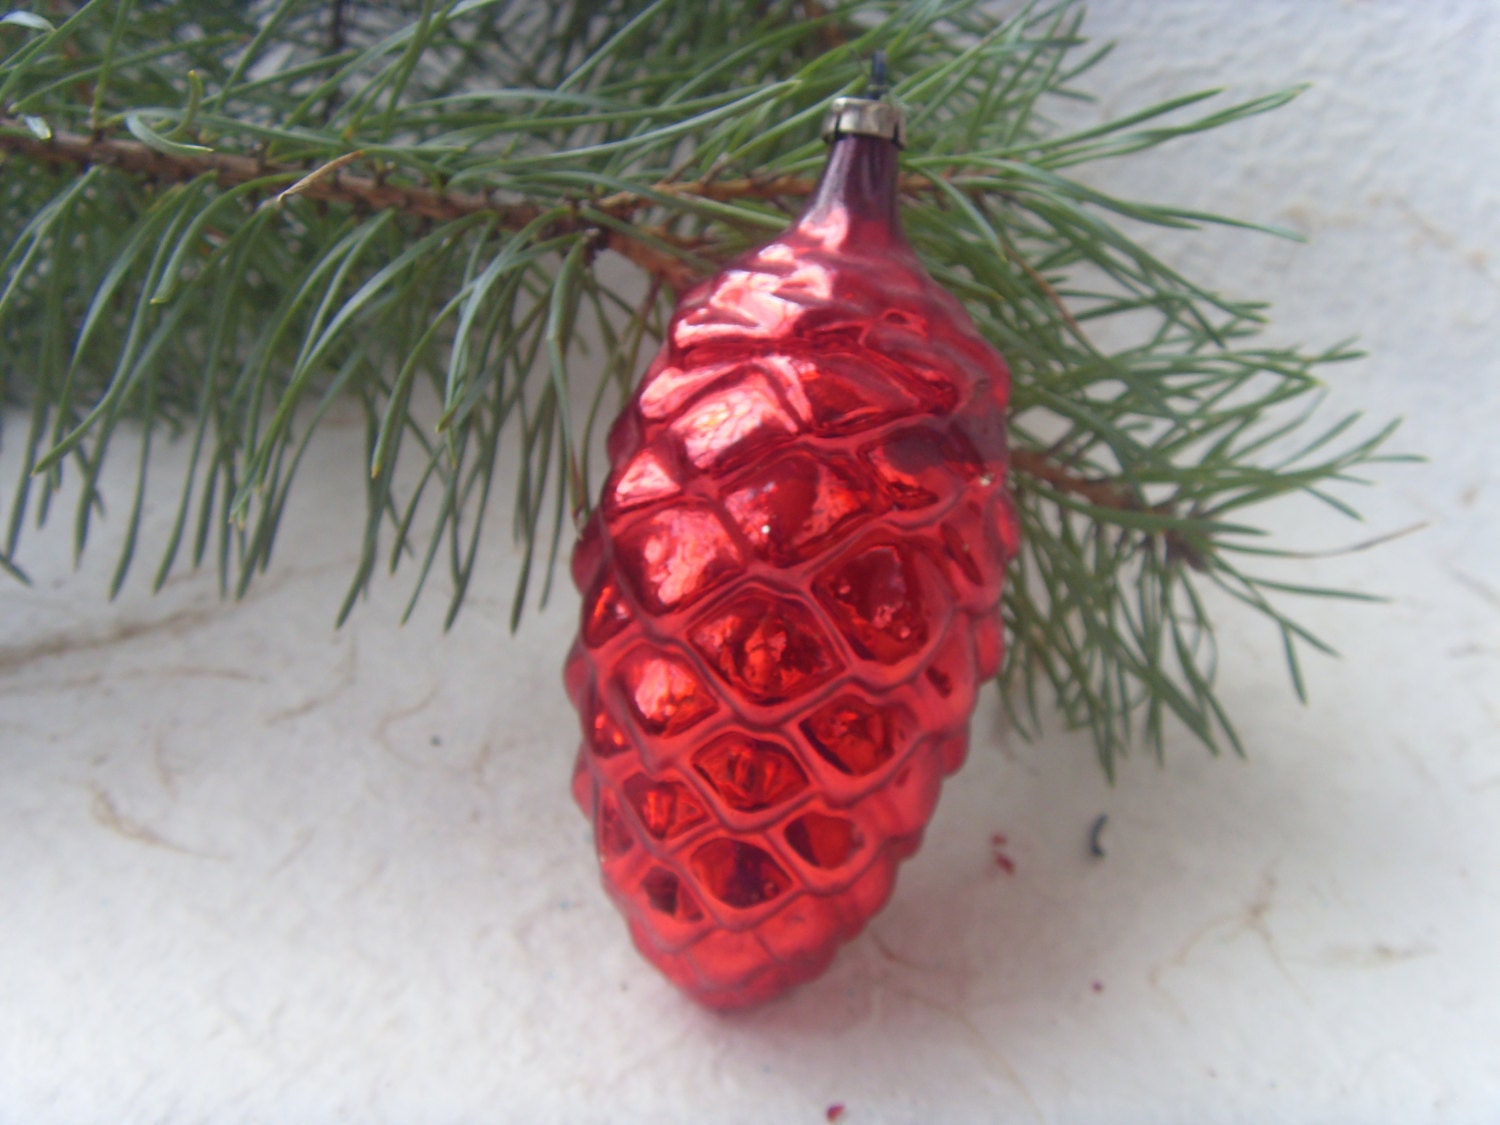 Soviet Vintage Red Cone Christmas Ornament, Made of Glass in USSR in 1968 - Astra9